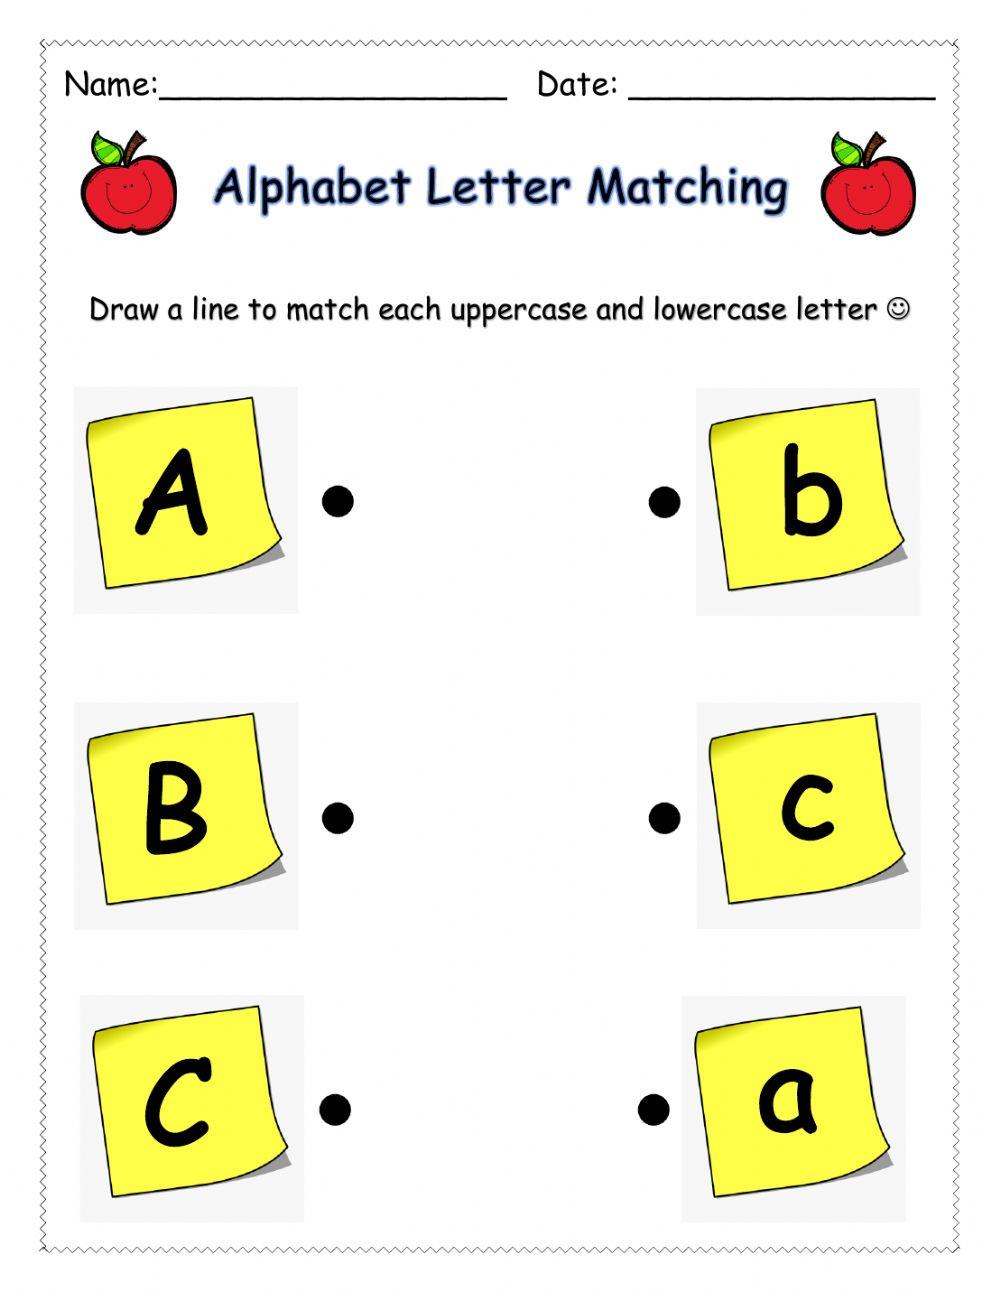 Letter Matching (ABC)